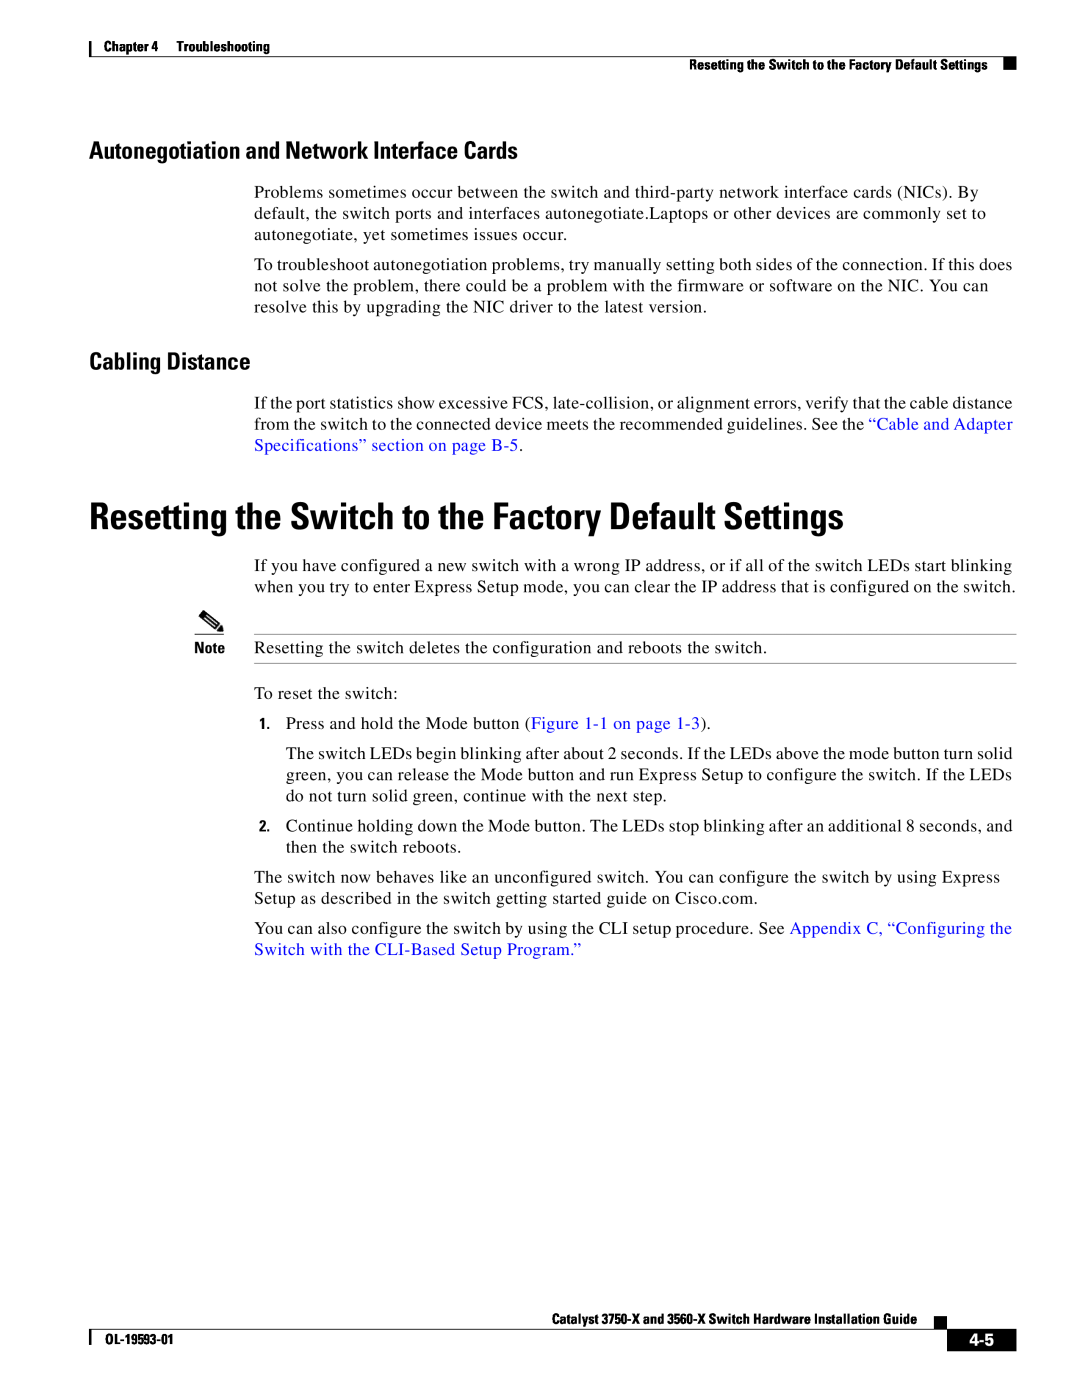 Cisco Systems 3560-X Resetting the Switch to the Factory Default Settings, Autonegotiation and Network Interface Cards 